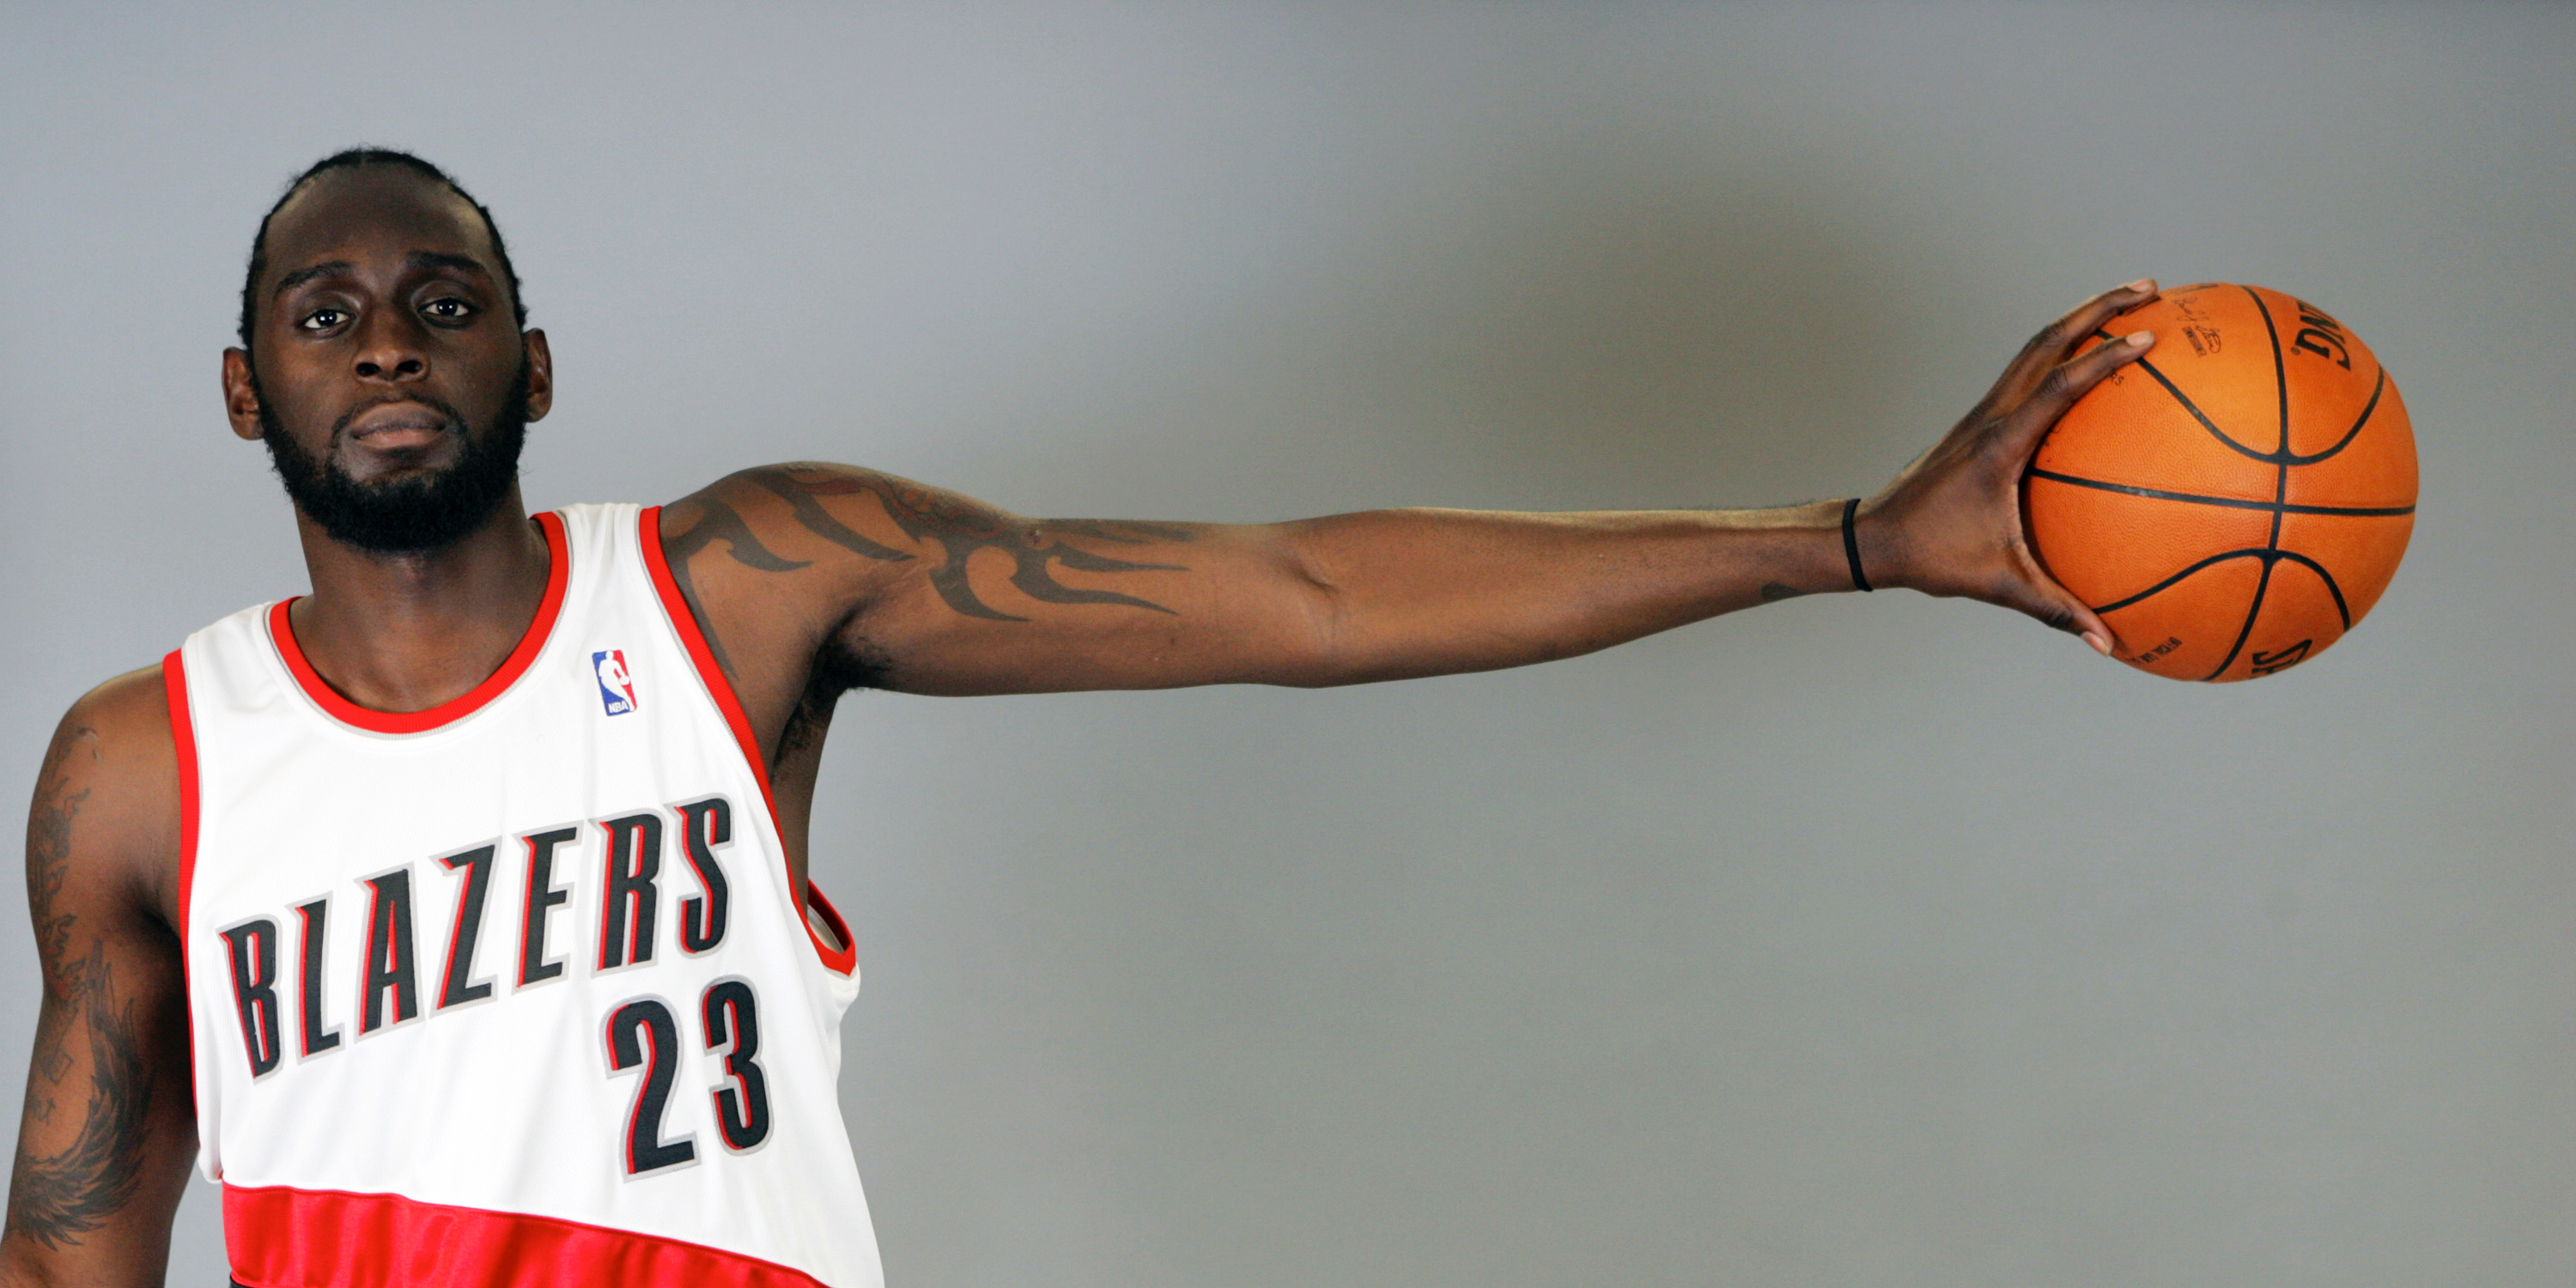 The 5 Worst NBA Uniforms and Jerseys in the 1990s 